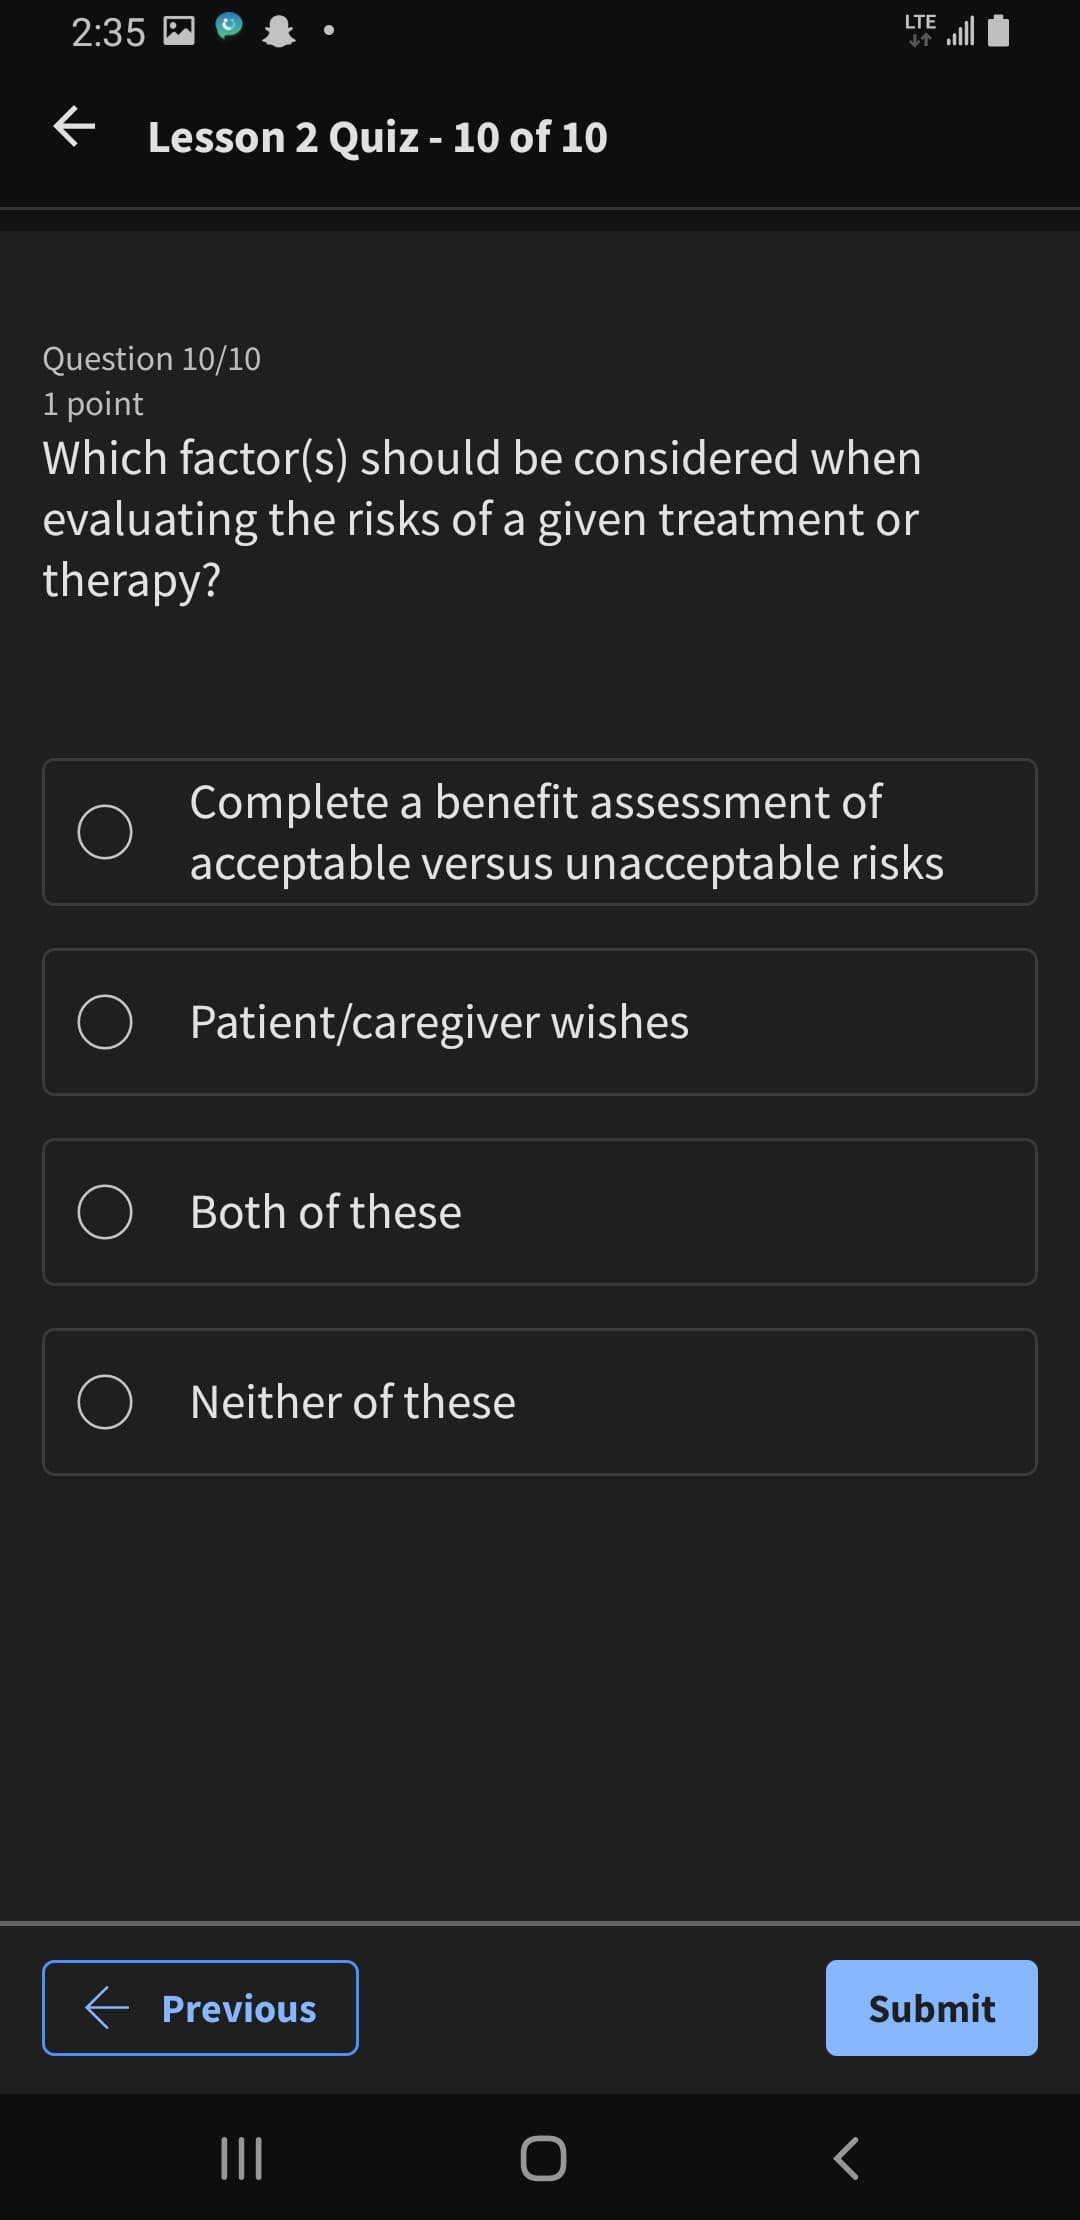 2:35
← Lesson 2 Quiz - 10 of 10
LTE
↓↑
Question 10/10
1 point
Which factor(s) should be considered when
evaluating the risks of a given treatment or
therapy?
Complete a benefit assessment of
acceptable versus unacceptable risks
Patient/caregiver wishes
Both of these
Neither of these
← Previous
|||
<
Submit